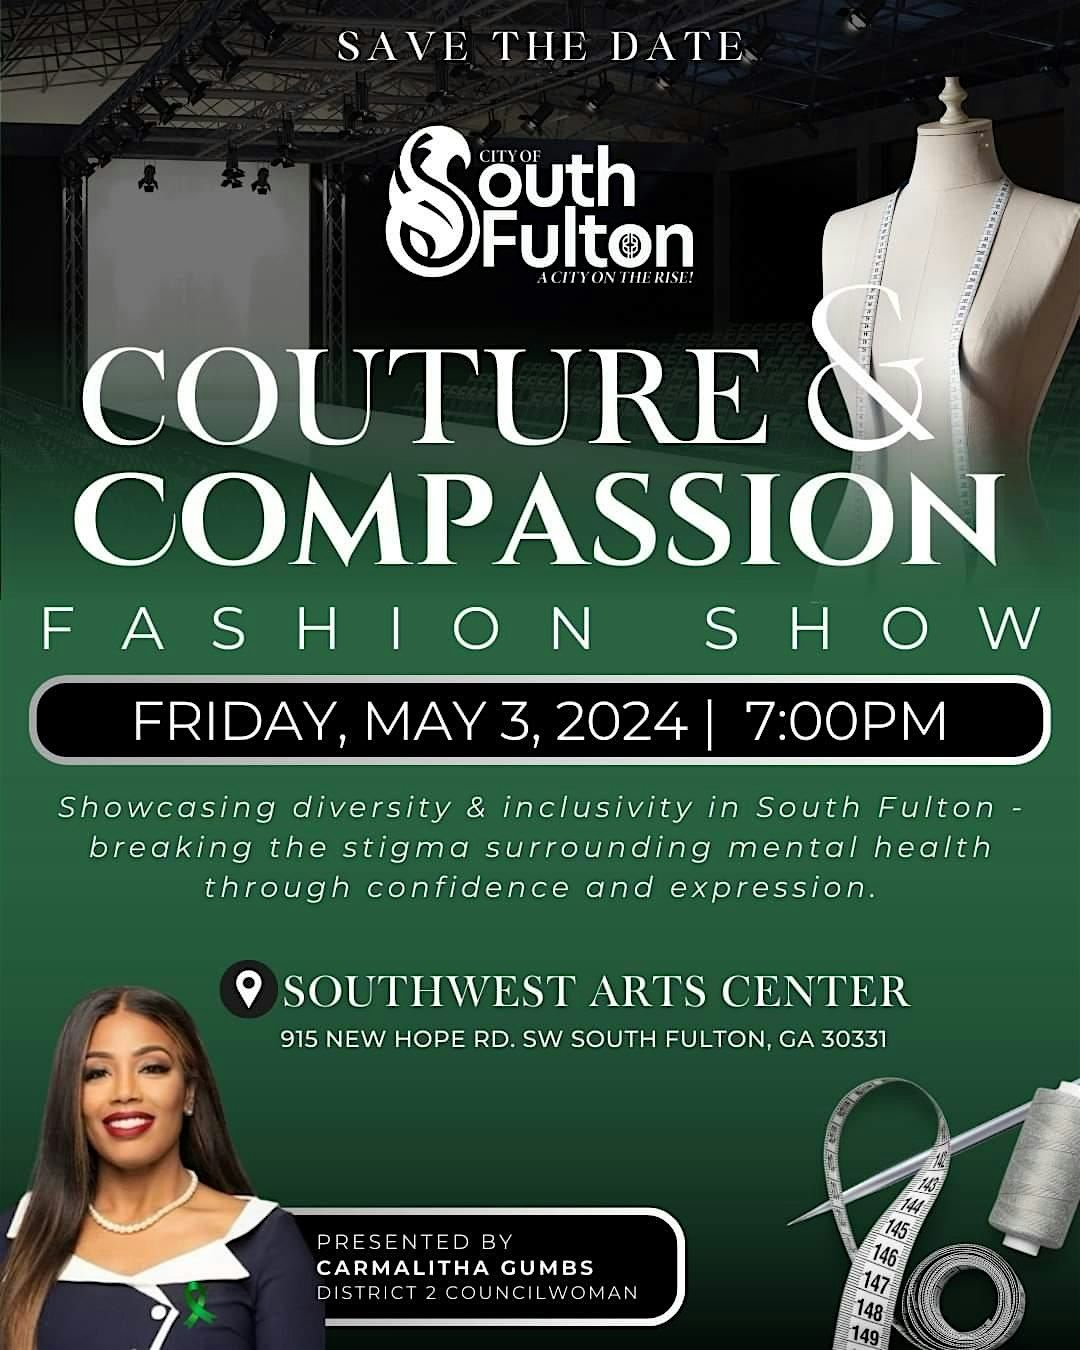 City of South Fulton - District 2 - Couture & Compassion